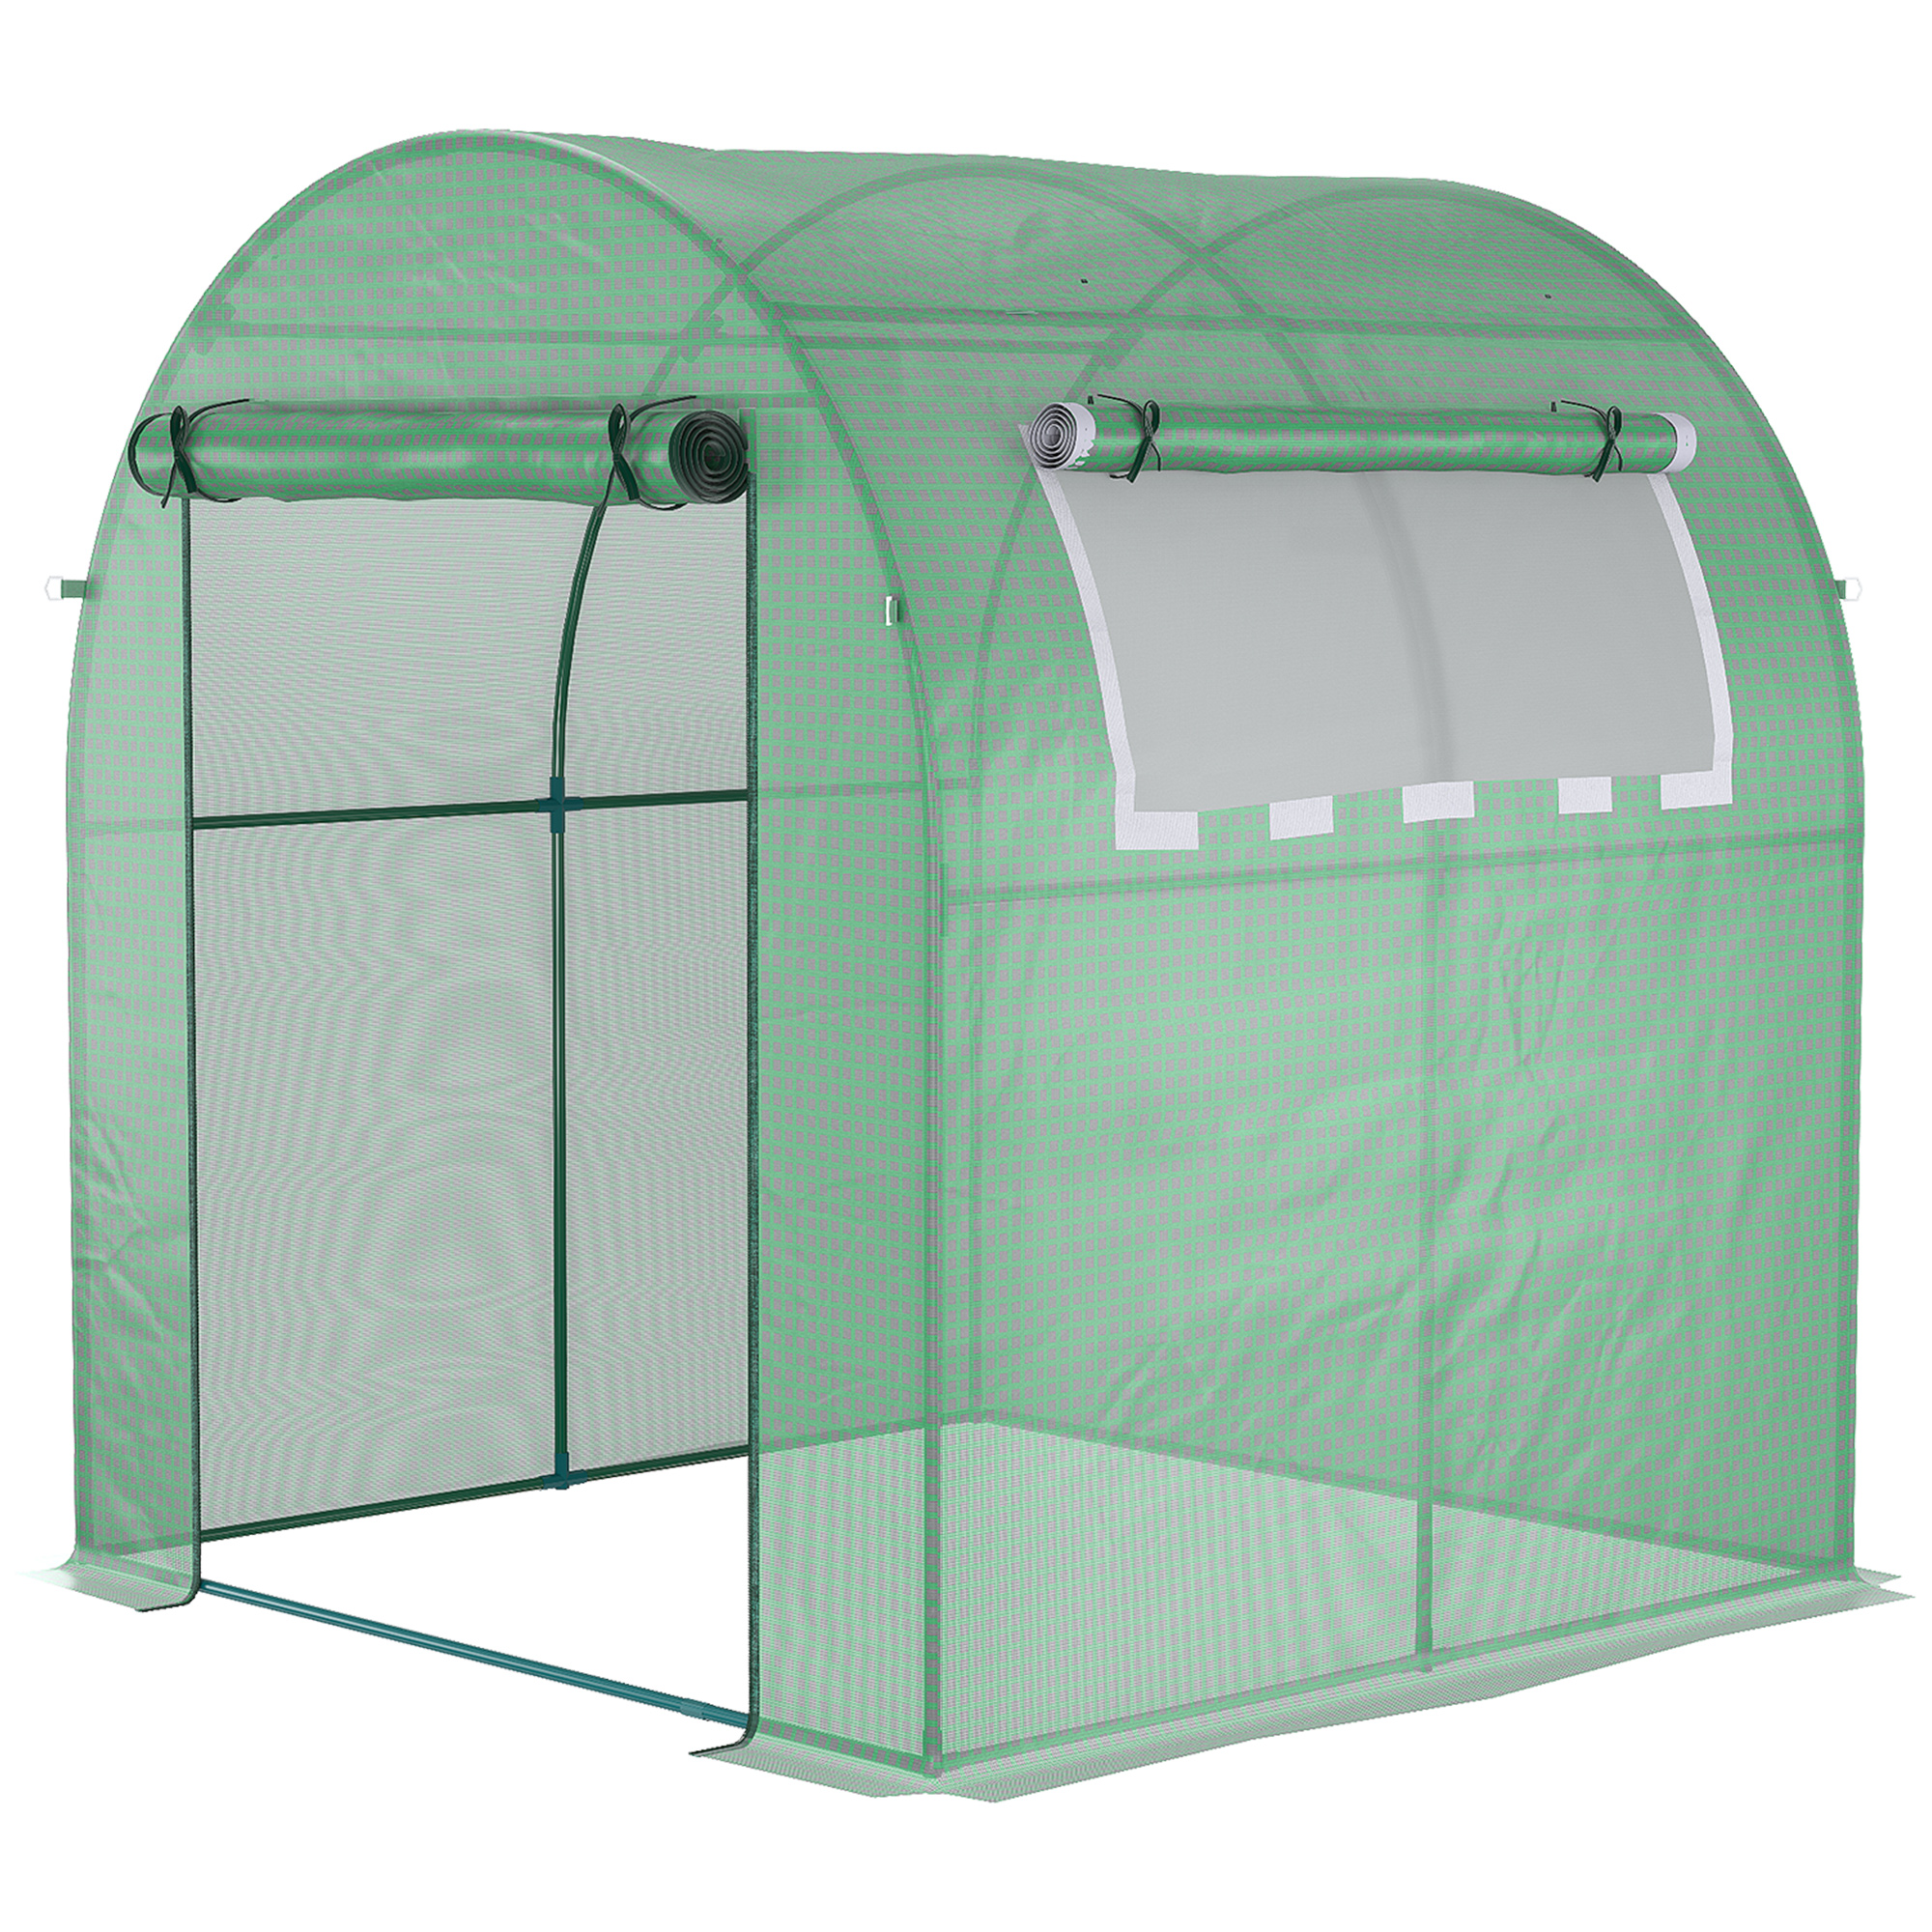 6' x 6' x 6.6' Walk-in Tunnel Greenhouse with Zippered Door